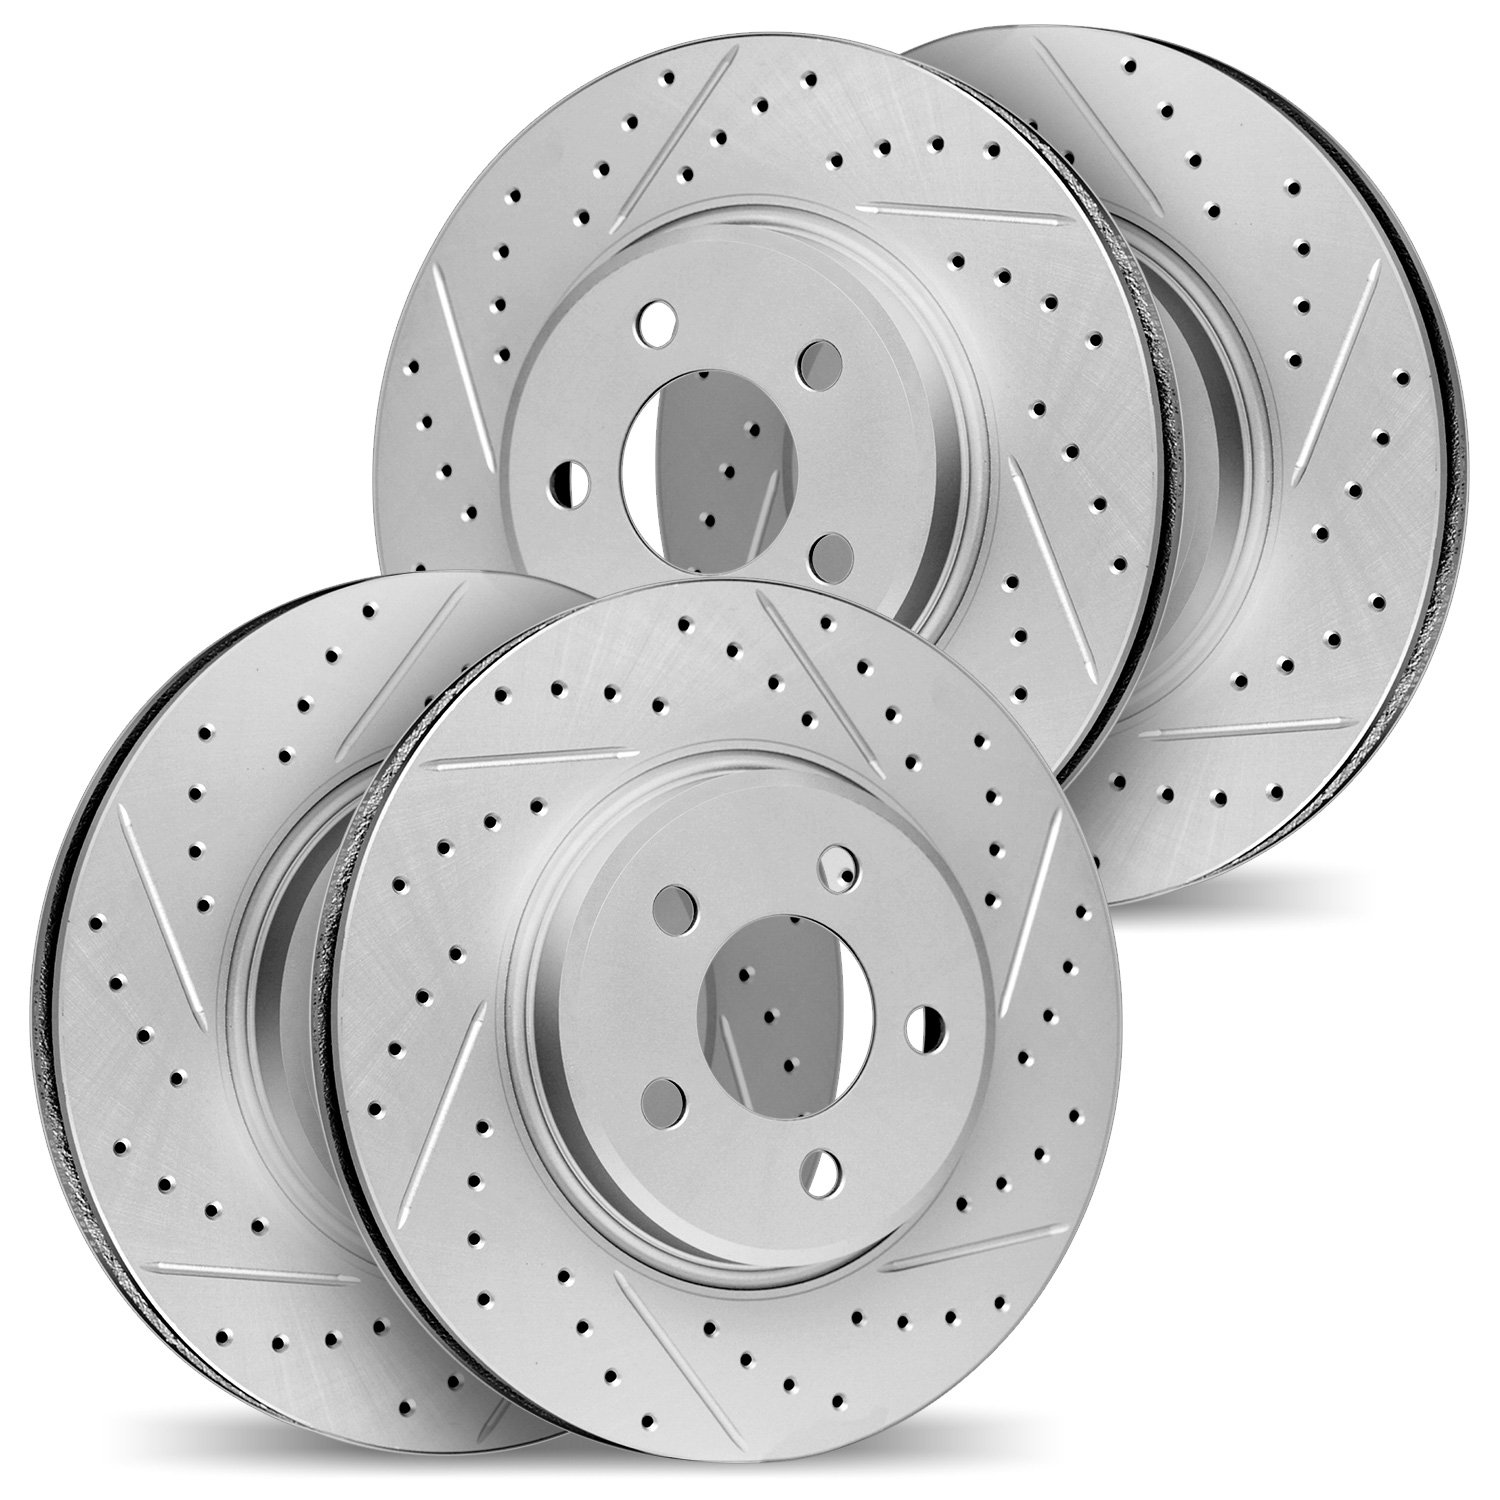 2004-27020 Geoperformance Drilled/Slotted Brake Rotors, 2016-2016 Volvo, Position: Front and Rear